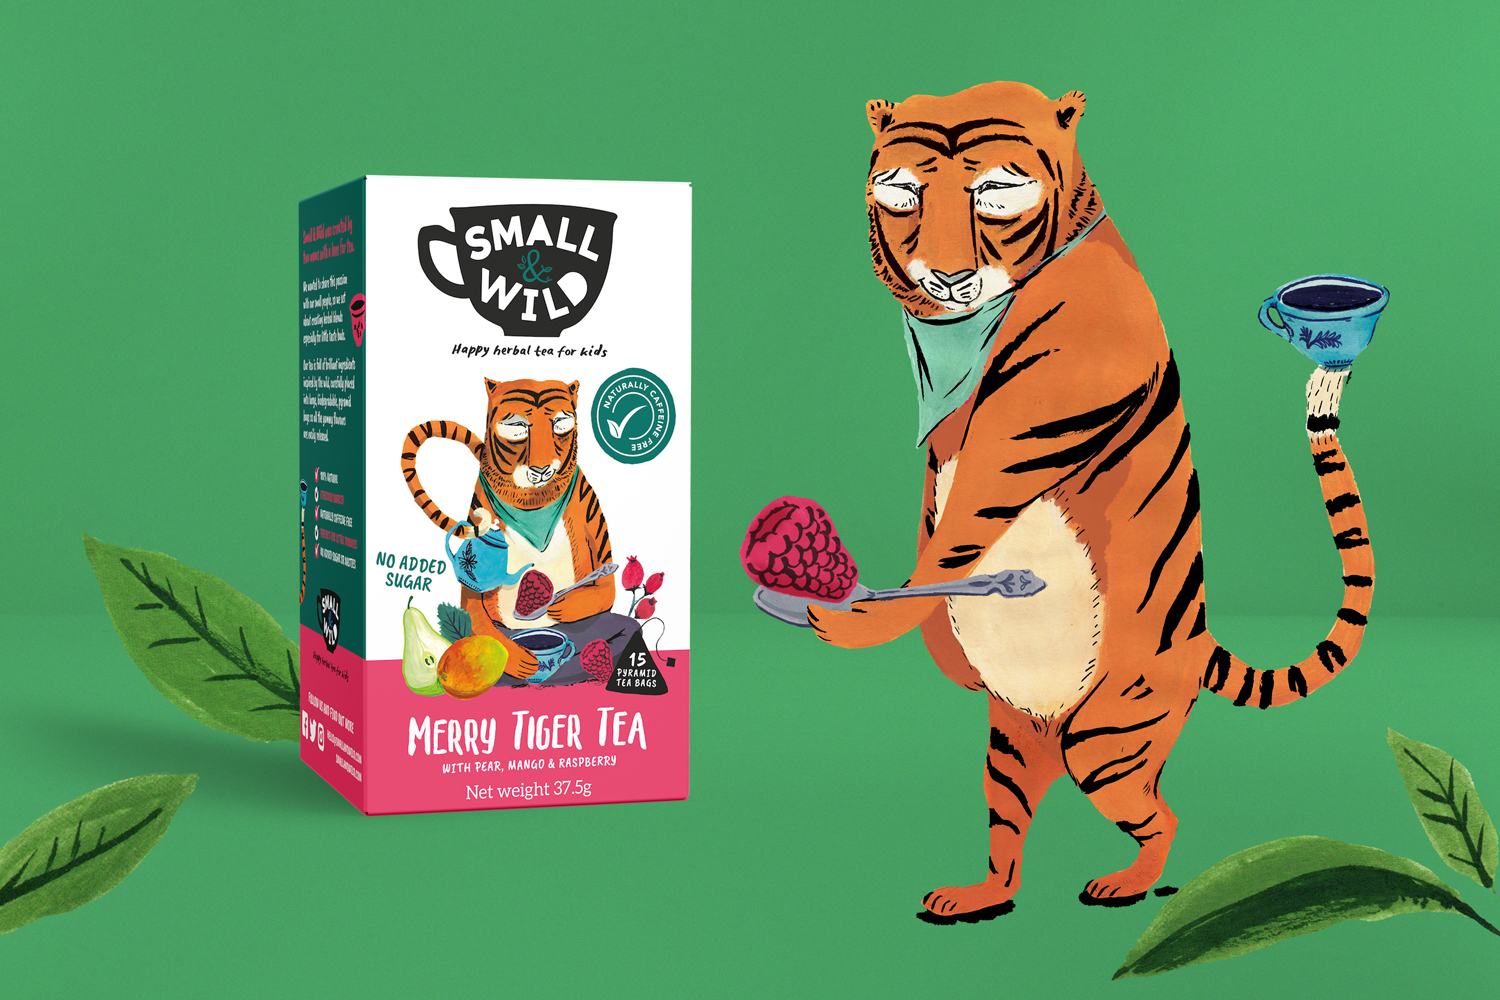 Small & Wild herbal tea for kids packaging and design tiger illustration Wild Bear Designs